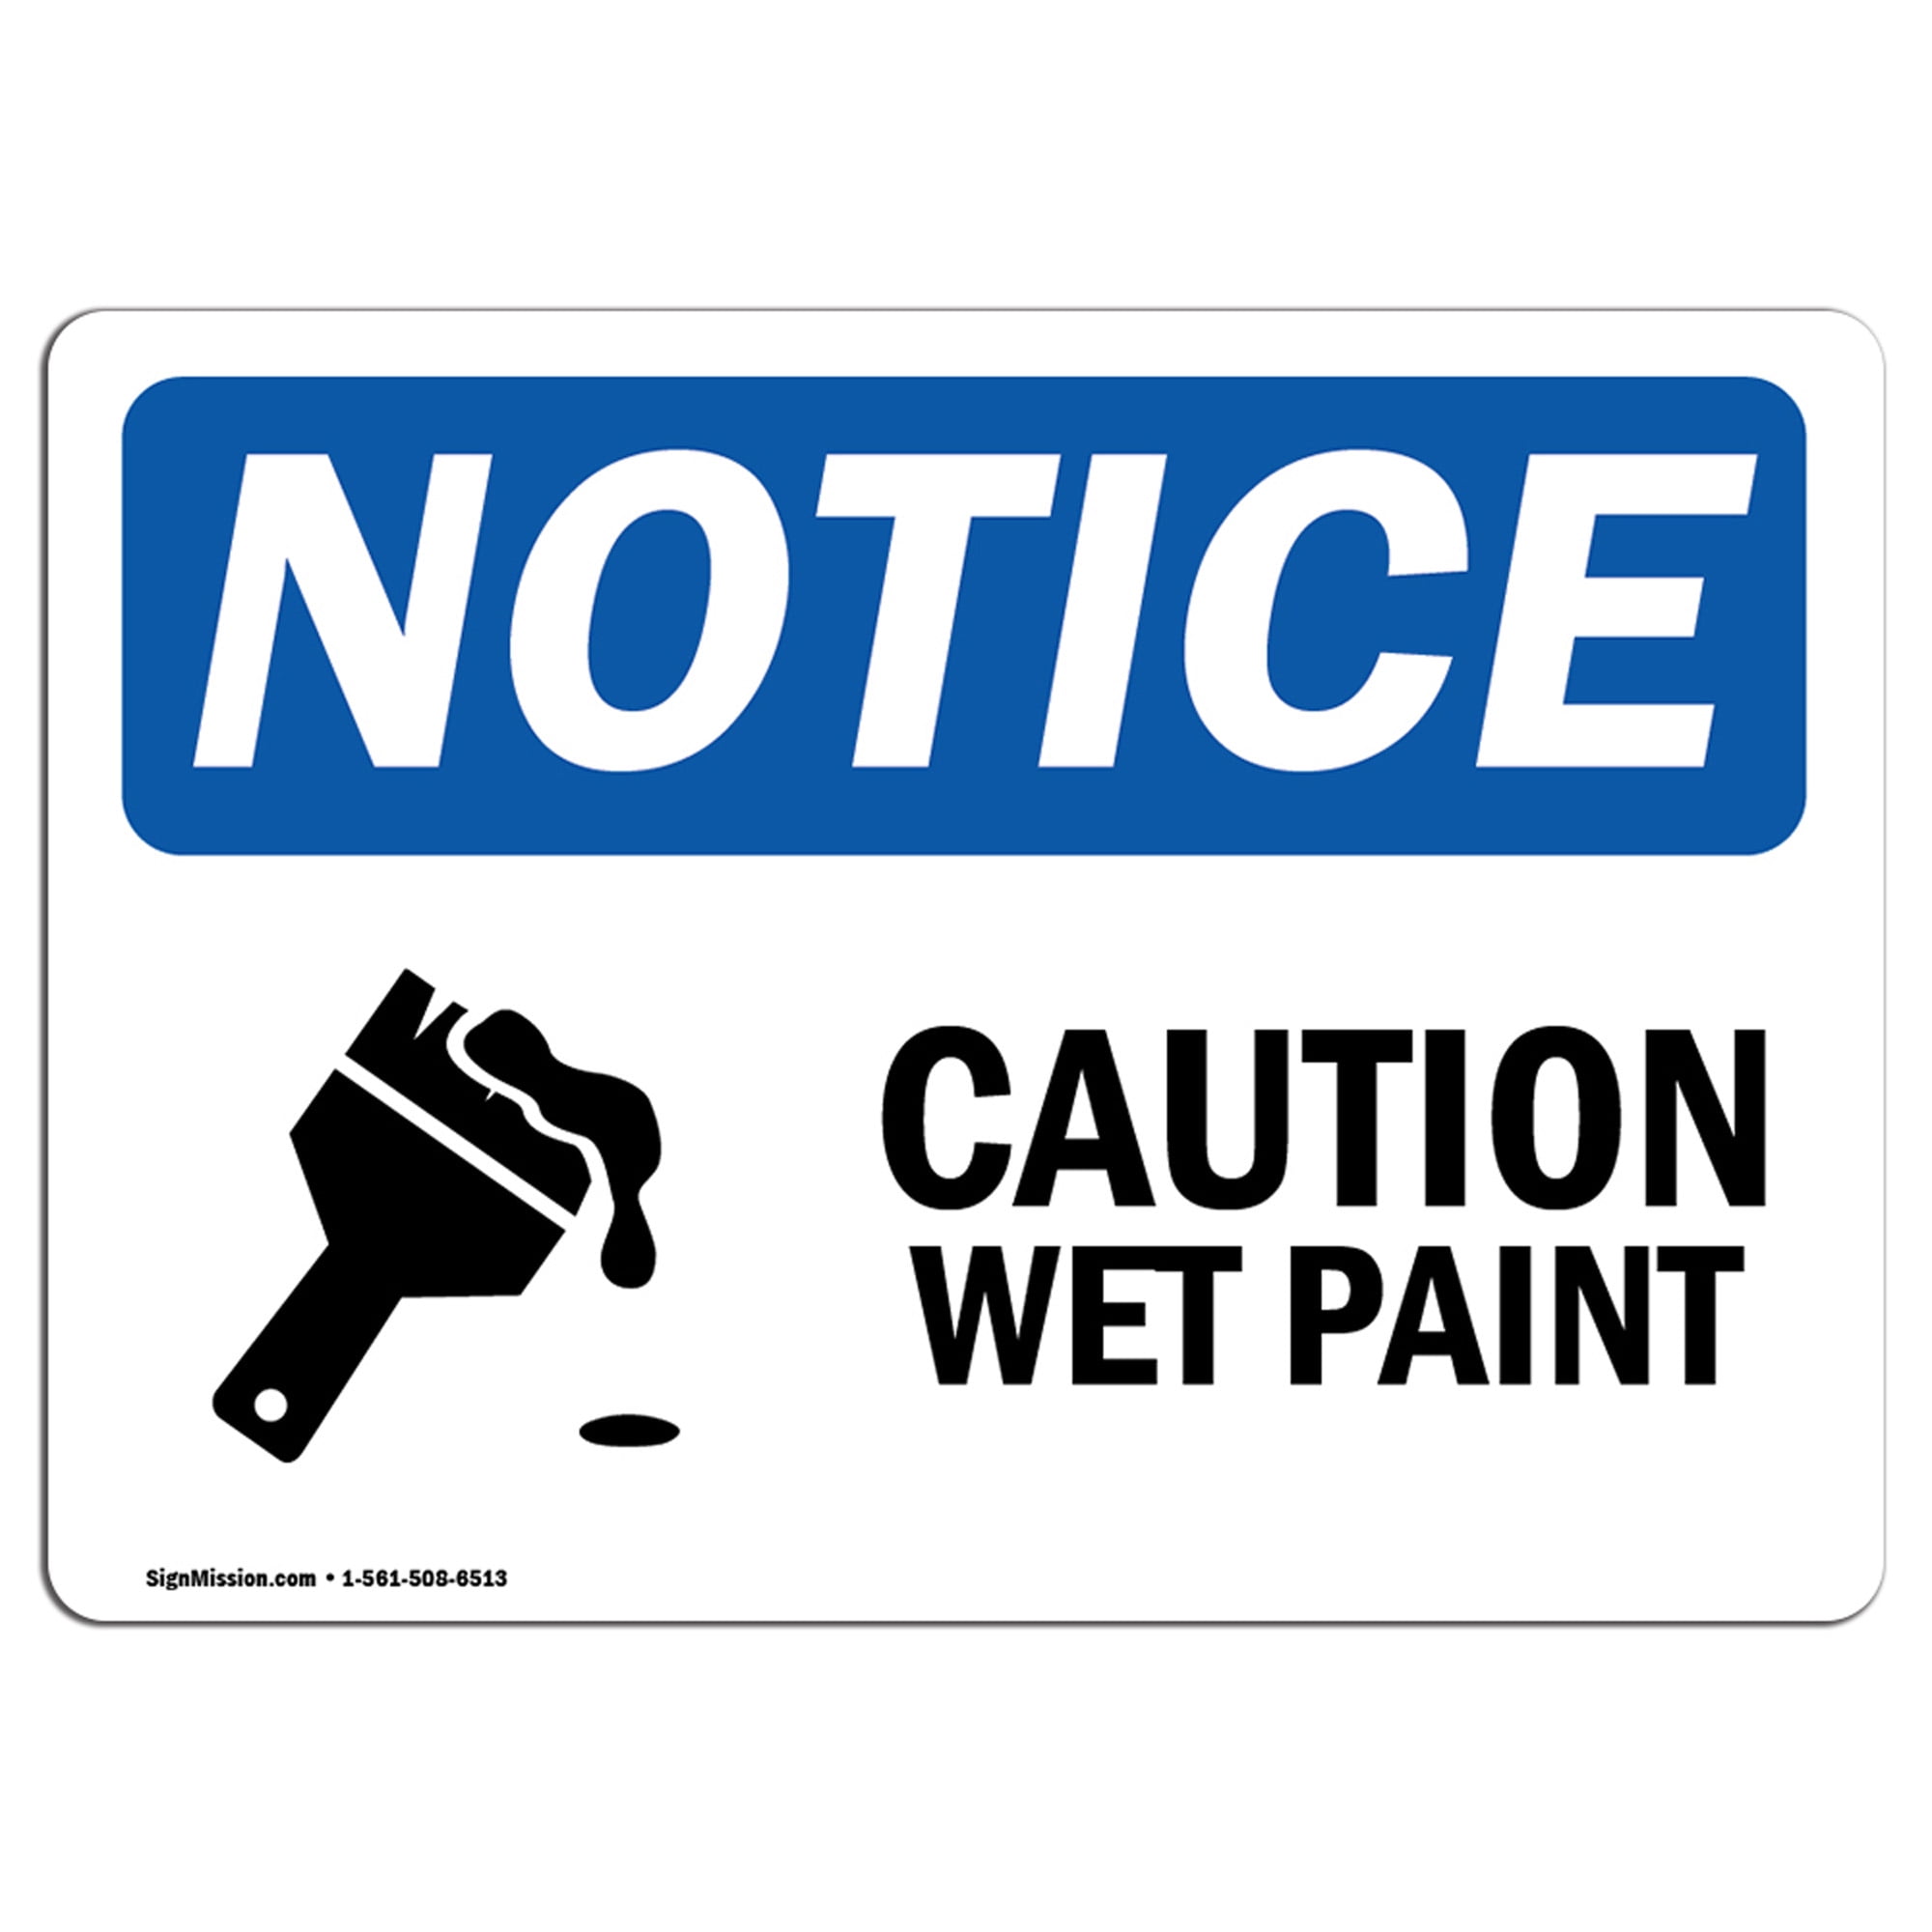 CAUTION WET PAINT Sign Red Letters on White  8.5" x 11" Cardboard USA #2 Two